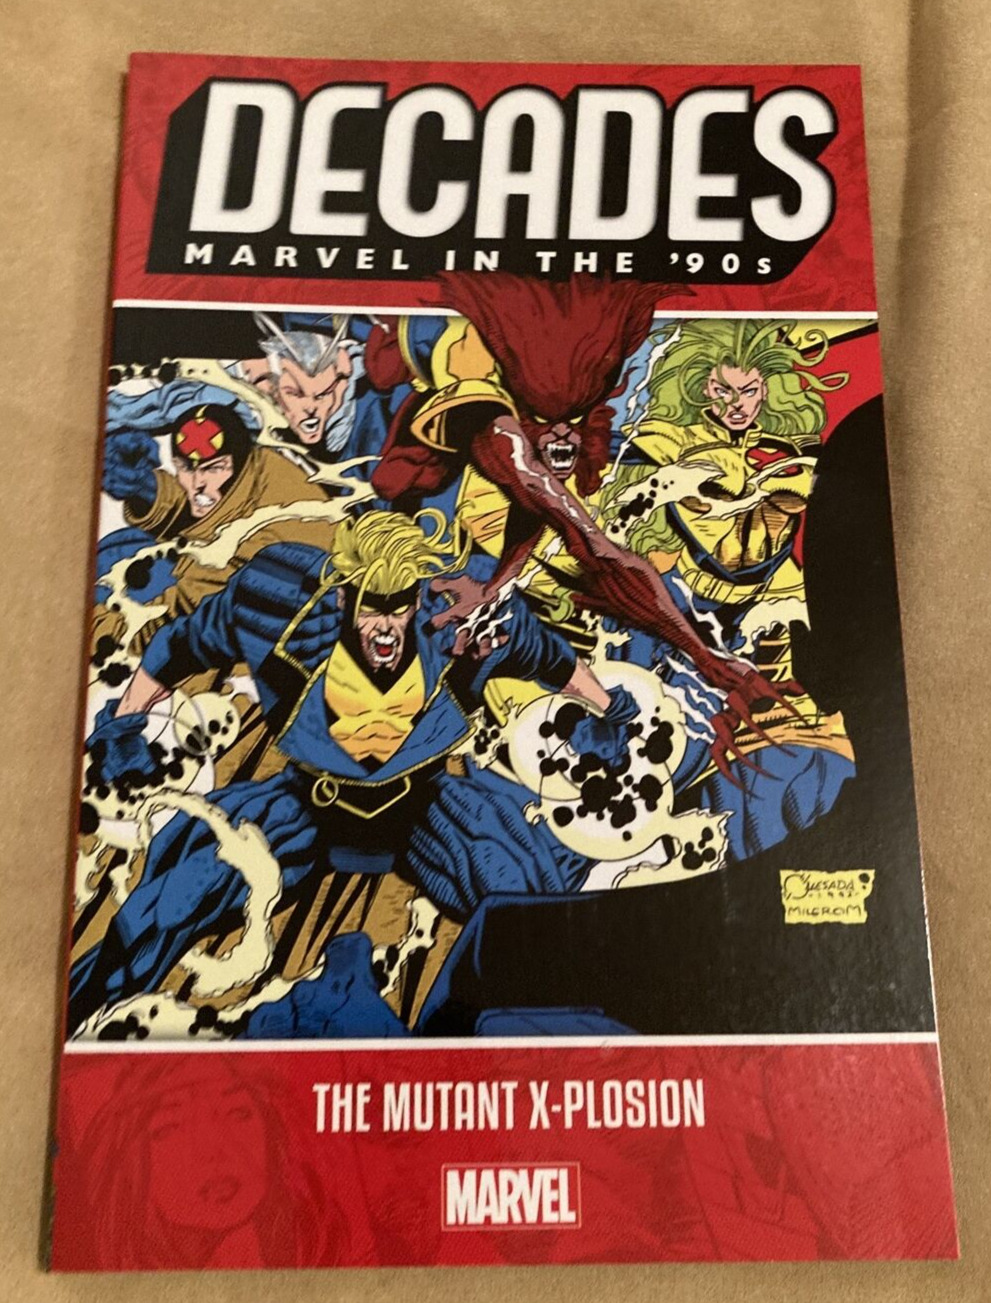 Decades Marvel in the \'90s: The Mutant X-Plosion TPB #1-1ST 2019 Nice